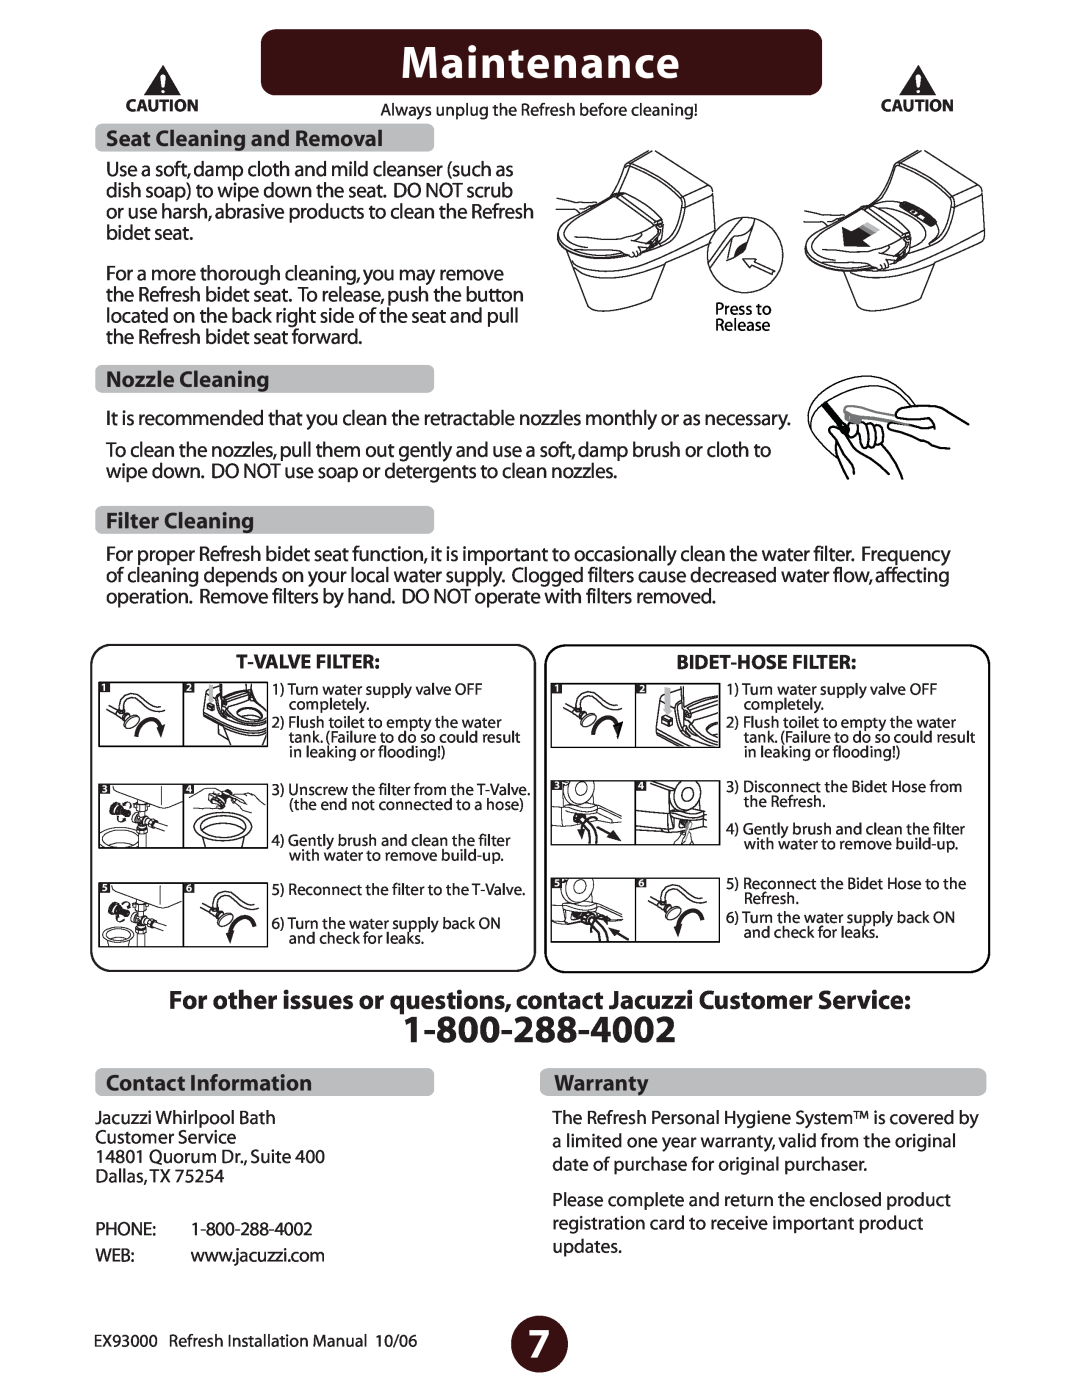 Jacuzzi EV77959 Maintenance, Seat Cleaning and Removal, Nozzle Cleaning, Filter Cleaning, Contact Information, Warranty 